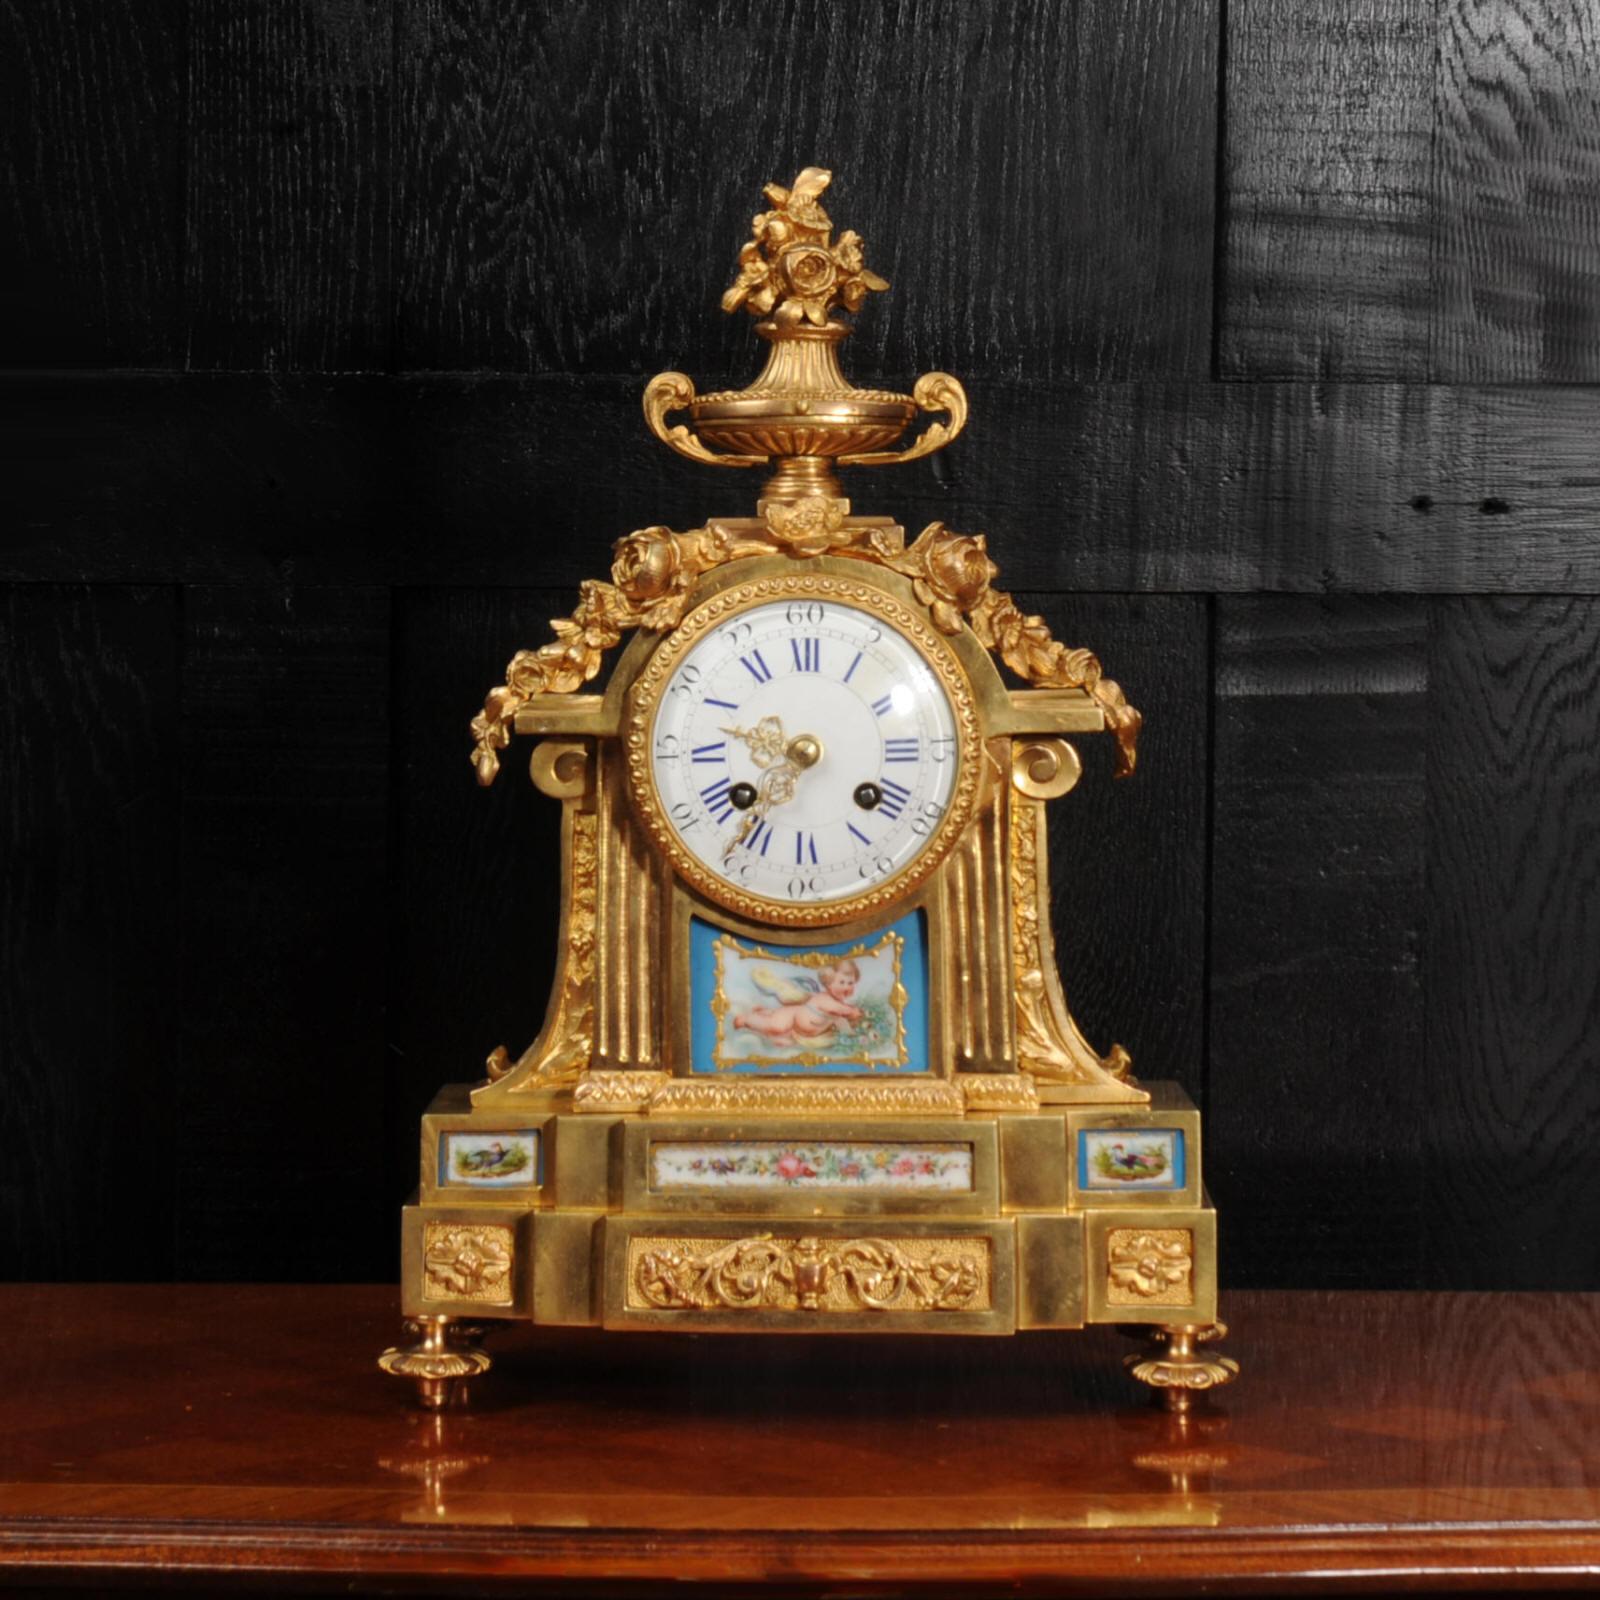 A lovely early antique French ormolu clock by Louis Japy, part of the great Japy clockmaking dynasty. It is of Louis XVI design and mounted with exquisite Sèvres style porcelain panels. The porcelain has a Bleu Celeste ground with delicately cherub,